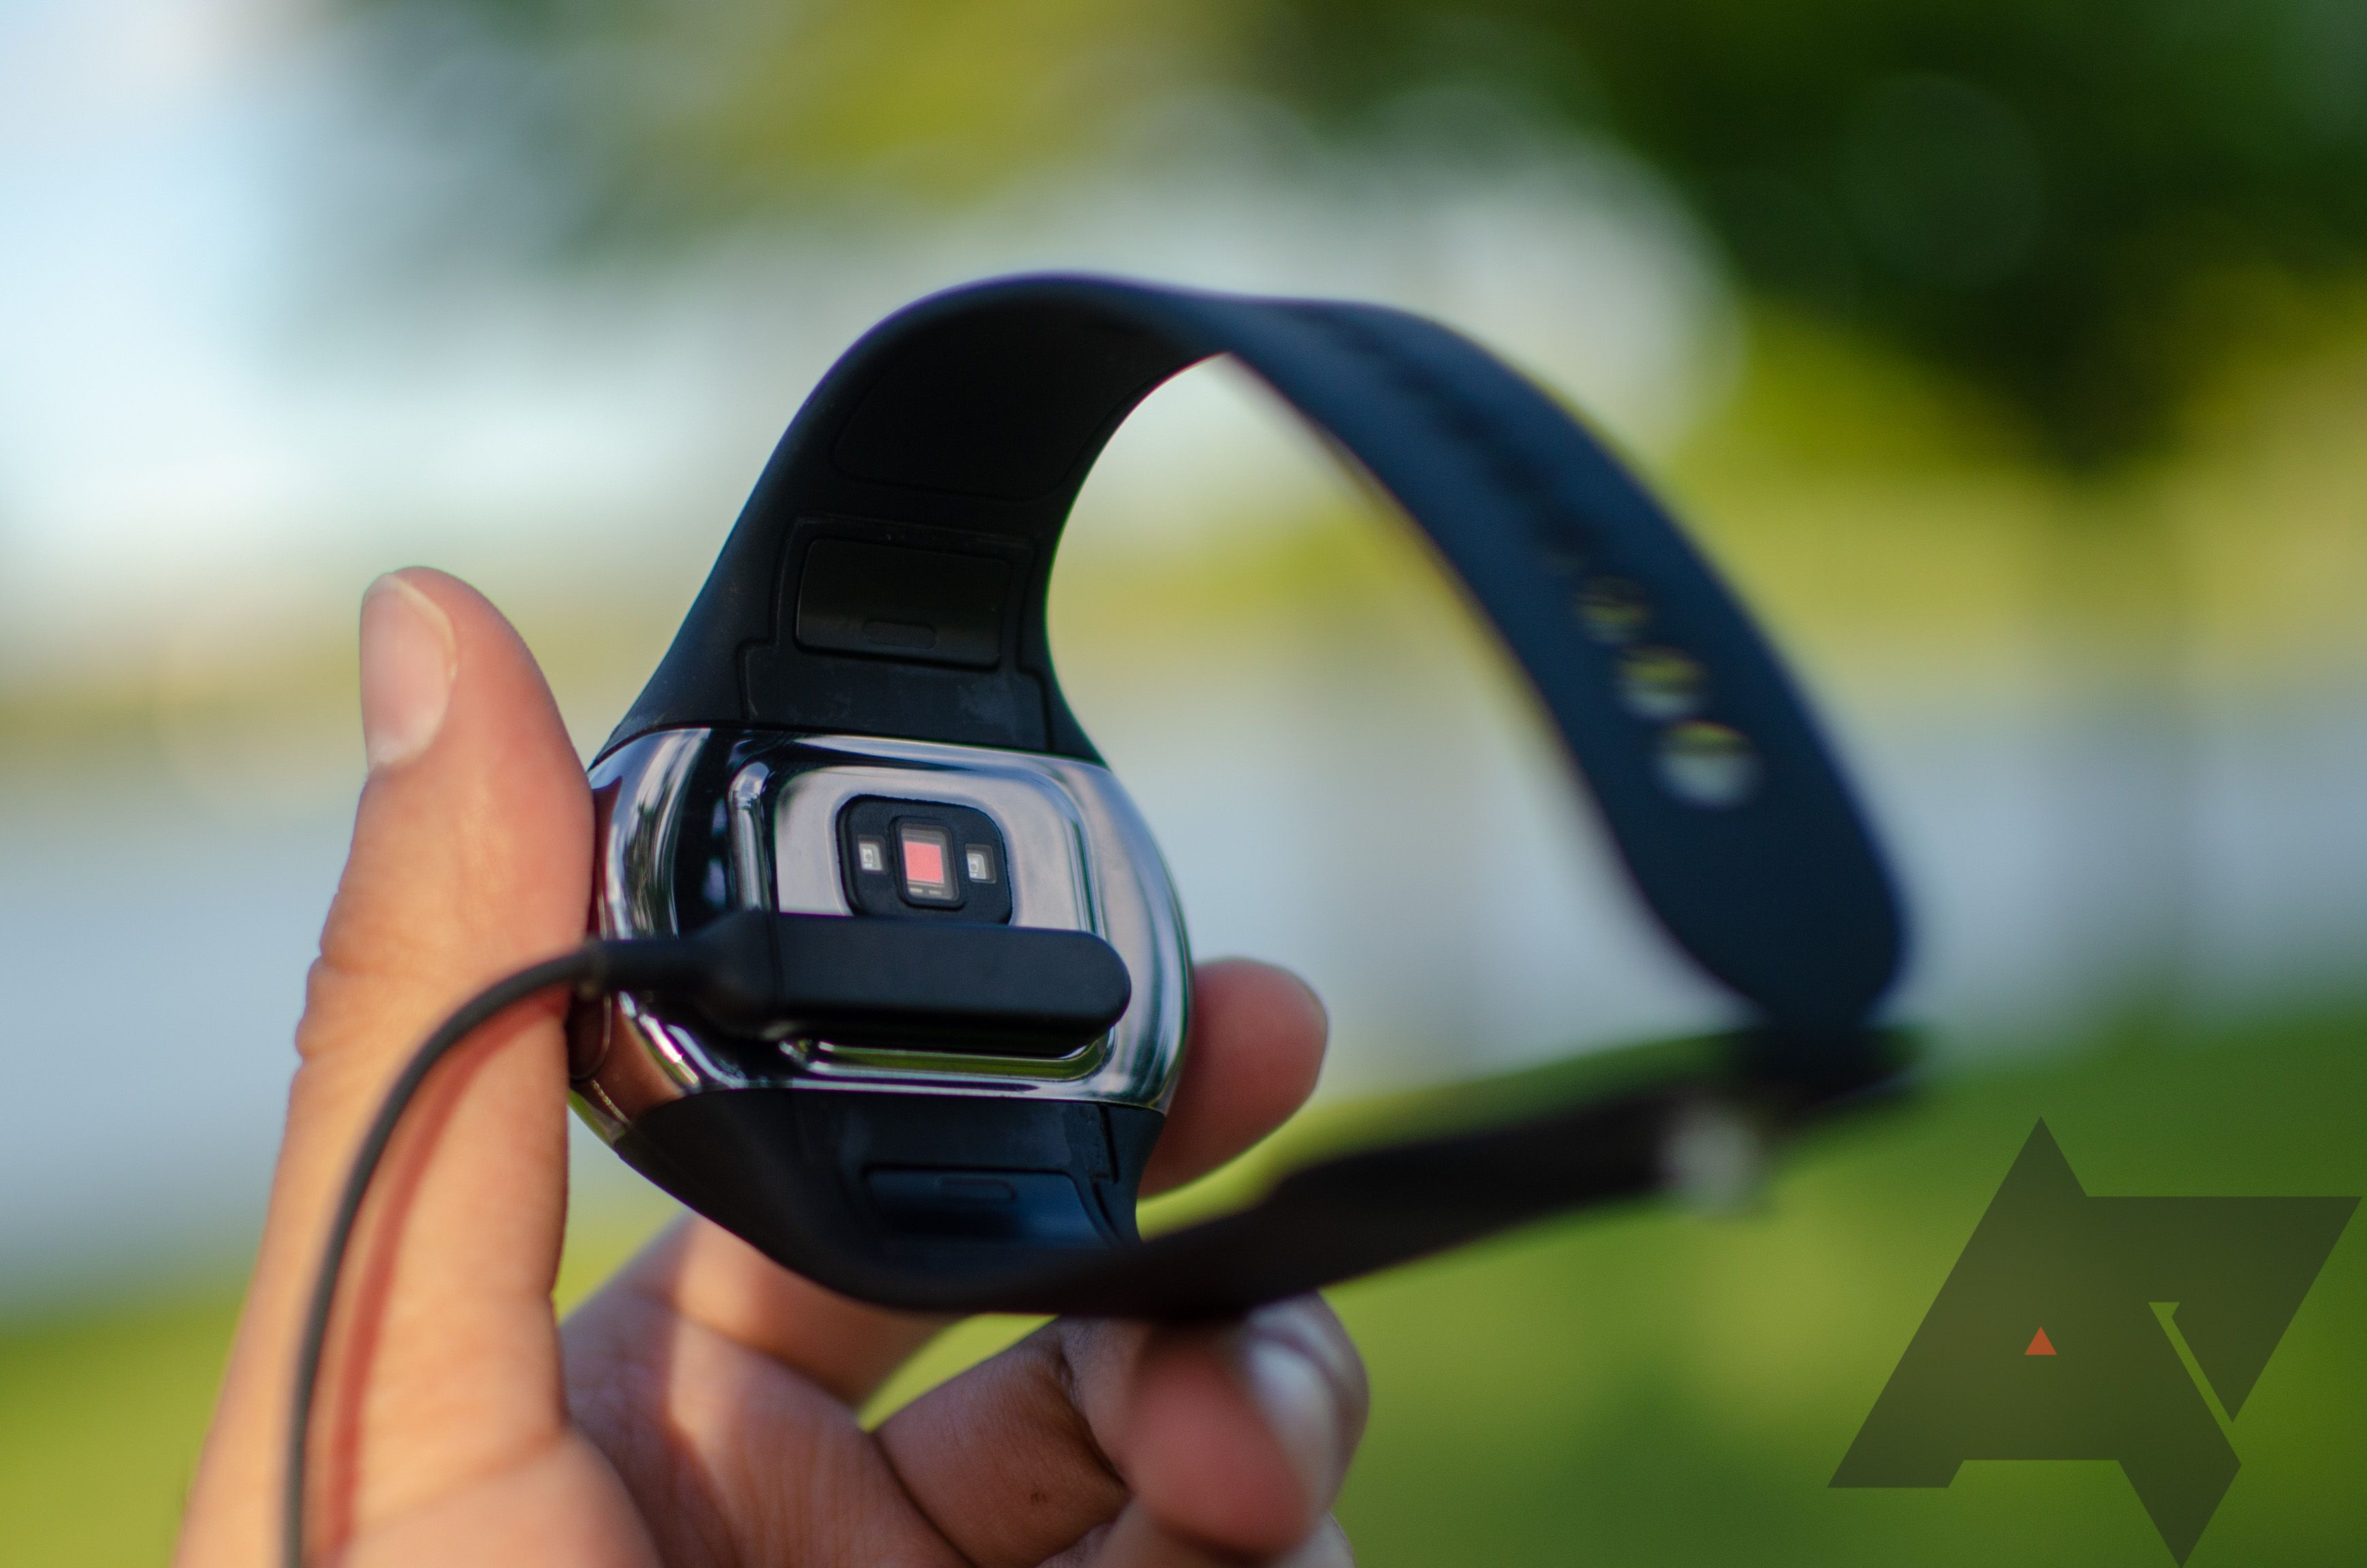 Wearbuds Watch by Aipower - As you wish of 4 years ago,Aipower had made he  new model of Wearbuds watch 2 can connect the earbuds directly and watch  can support 32G memory